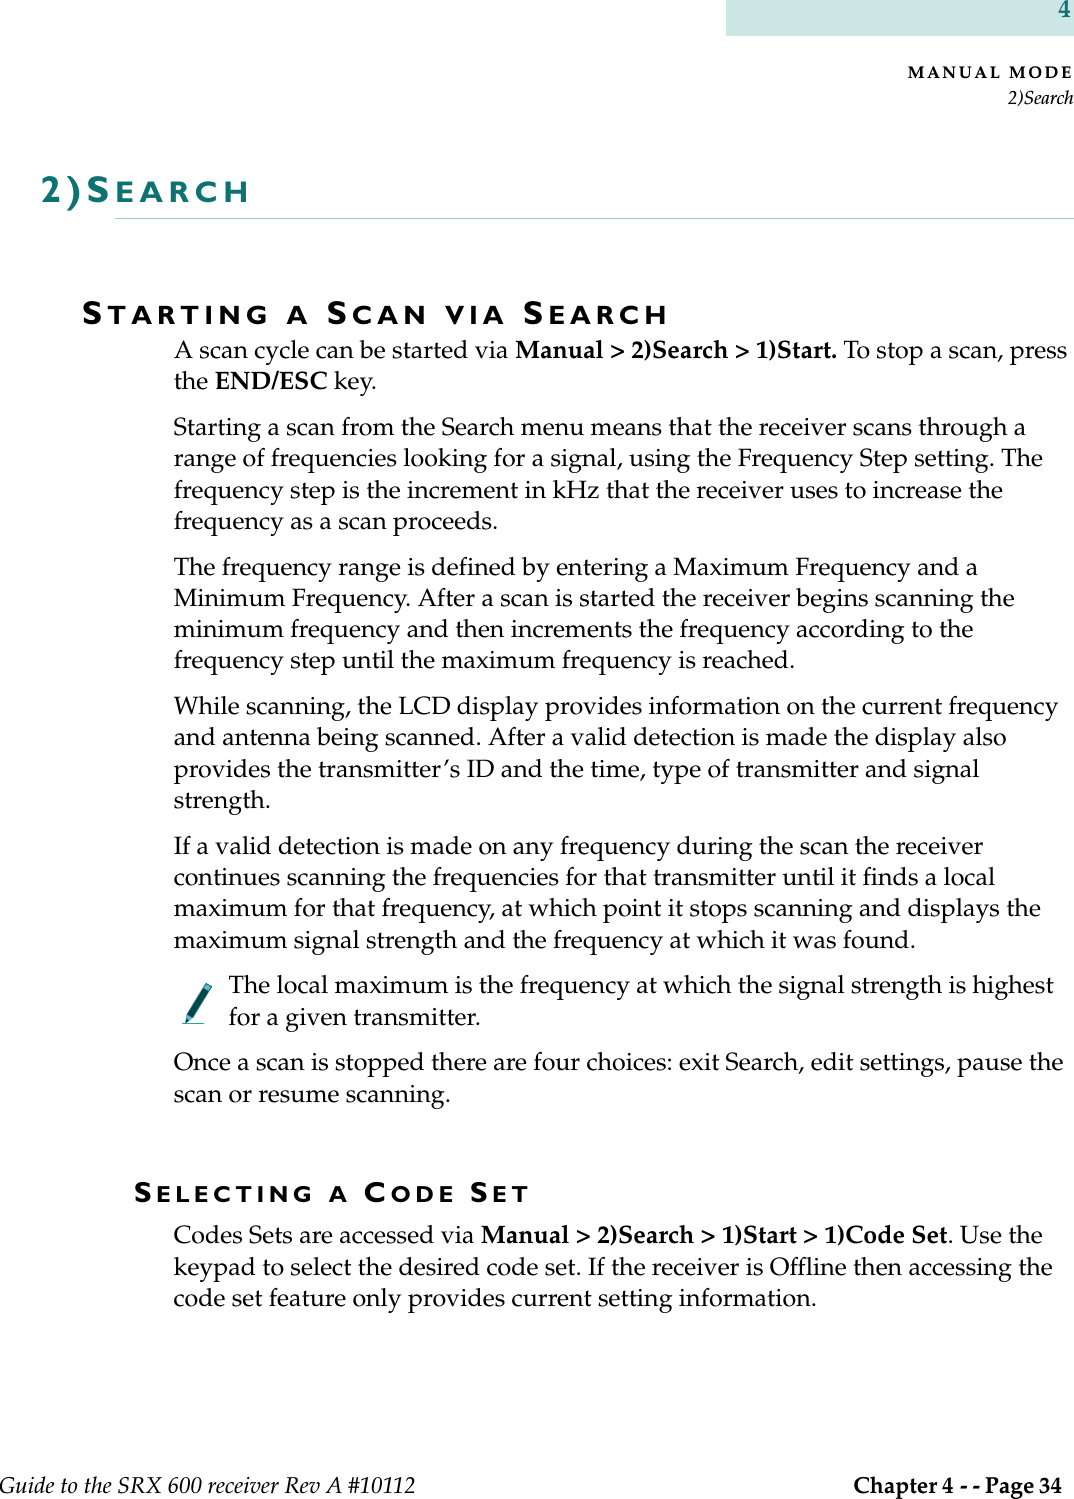 MANUAL MODE2)SearchGuide to the SRX 600 receiver Rev A #10112  Chapter 4 - - Page 34 42)SEARCHSTARTING A SCAN VIA SEARCHA scan cycle can be started via Manual &gt; 2)Search &gt; 1)Start. To stop a scan, press the END/ESC key.Starting a scan from the Search menu means that the receiver scans through a range of frequencies looking for a signal, using the Frequency Step setting. The frequency step is the increment in kHz that the receiver uses to increase the frequency as a scan proceeds.The frequency range is defined by entering a Maximum Frequency and a Minimum Frequency. After a scan is started the receiver begins scanning the minimum frequency and then increments the frequency according to the frequency step until the maximum frequency is reached.While scanning, the LCD display provides information on the current frequency and antenna being scanned. After a valid detection is made the display also provides the transmitter’s ID and the time, type of transmitter and signal strength.If a valid detection is made on any frequency during the scan the receiver continues scanning the frequencies for that transmitter until it finds a local maximum for that frequency, at which point it stops scanning and displays the maximum signal strength and the frequency at which it was found.   The local maximum is the frequency at which the signal strength is highest for a given transmitter.Once a scan is stopped there are four choices: exit Search, edit settings, pause the scan or resume scanning.SELECTING A CODE SETCodes Sets are accessed via Manual &gt; 2)Search &gt; 1)Start &gt; 1)Code Set. Use the keypad to select the desired code set. If the receiver is Offline then accessing the code set feature only provides current setting information. 